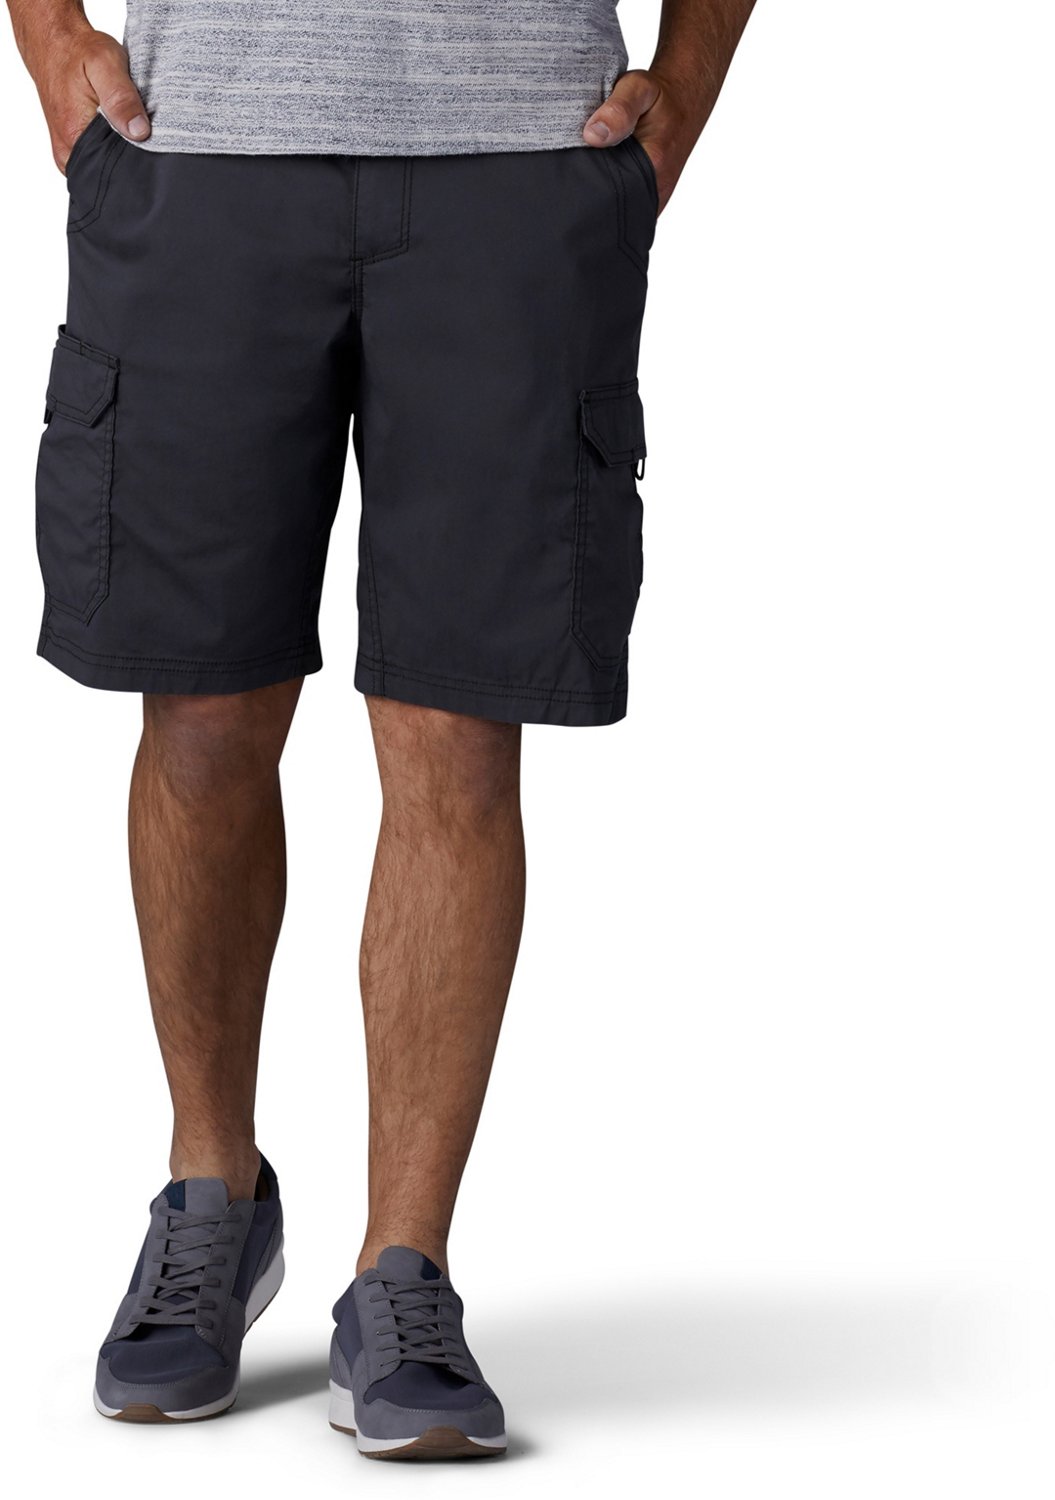 Lee Men's Crossroad Cargo Shorts | Free Shipping at Academy